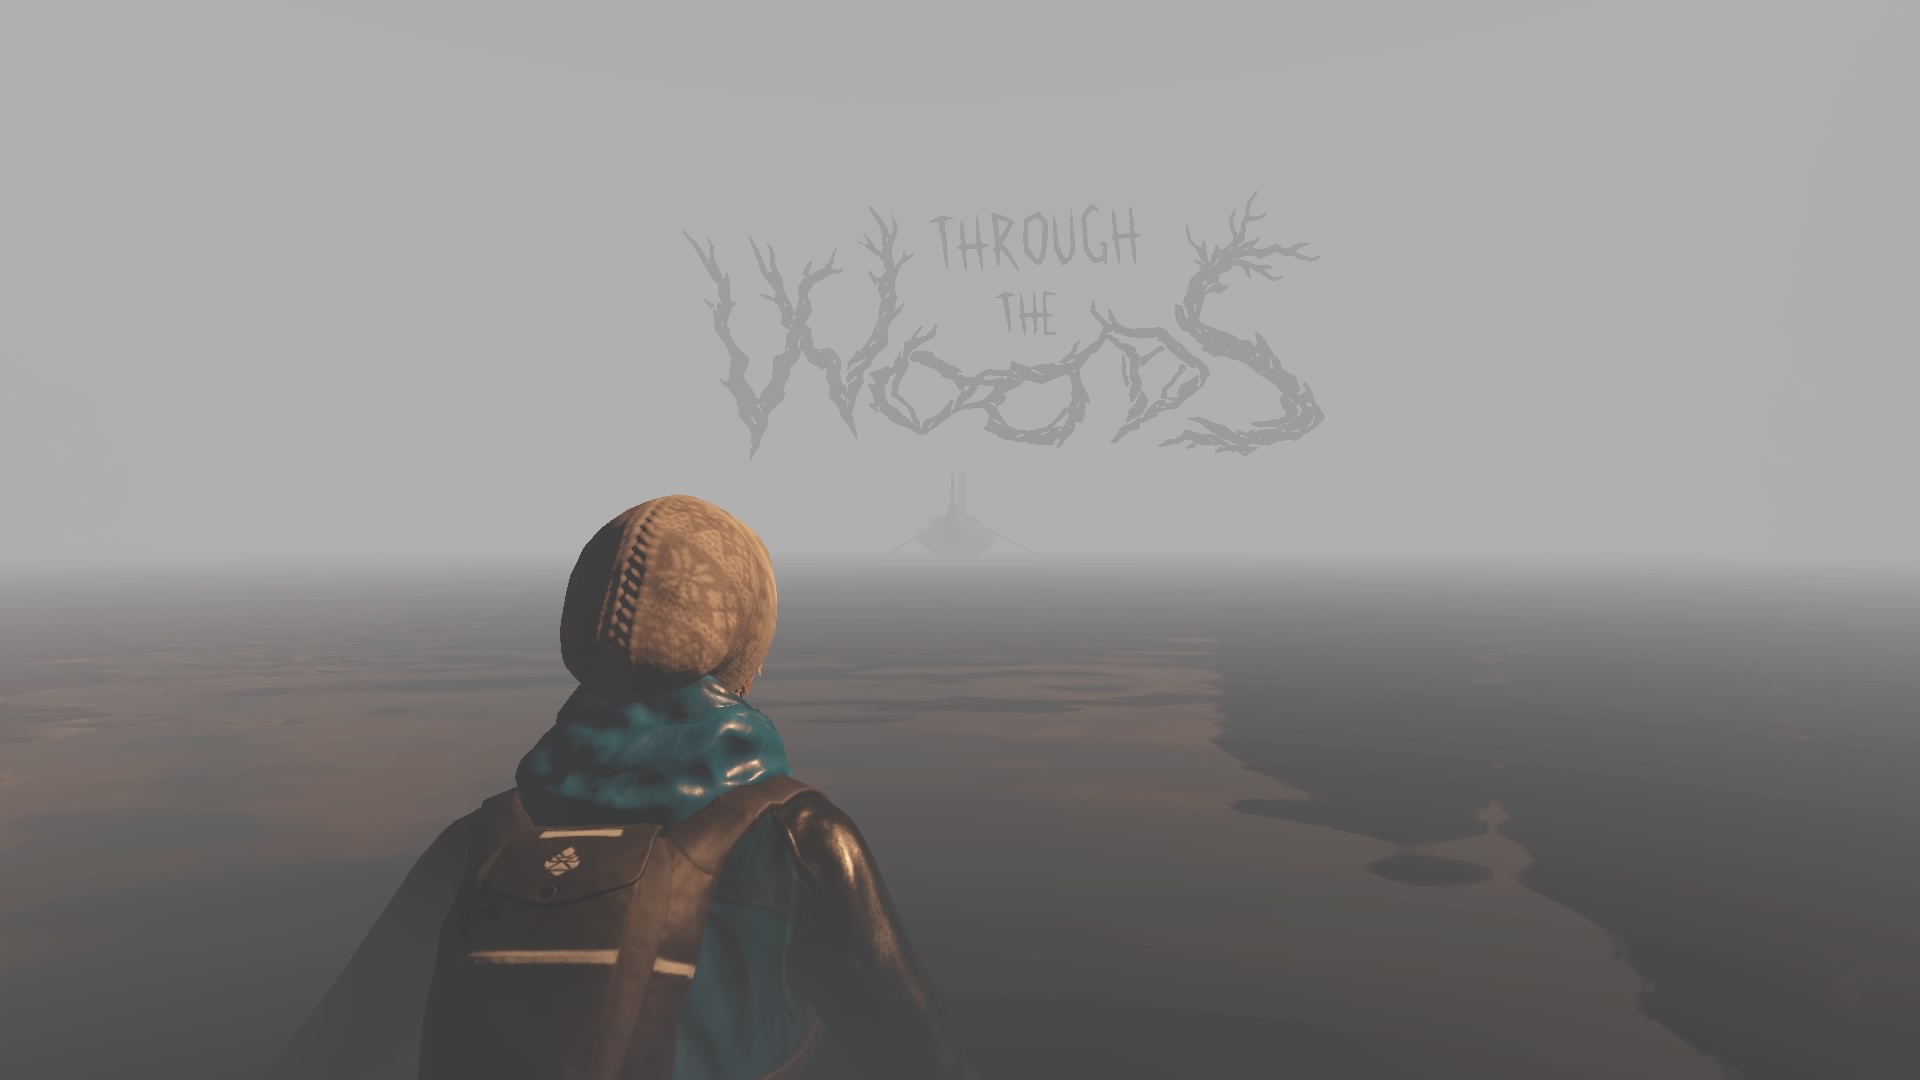 Through the Woods (2016 – Survival – Playstation 4)